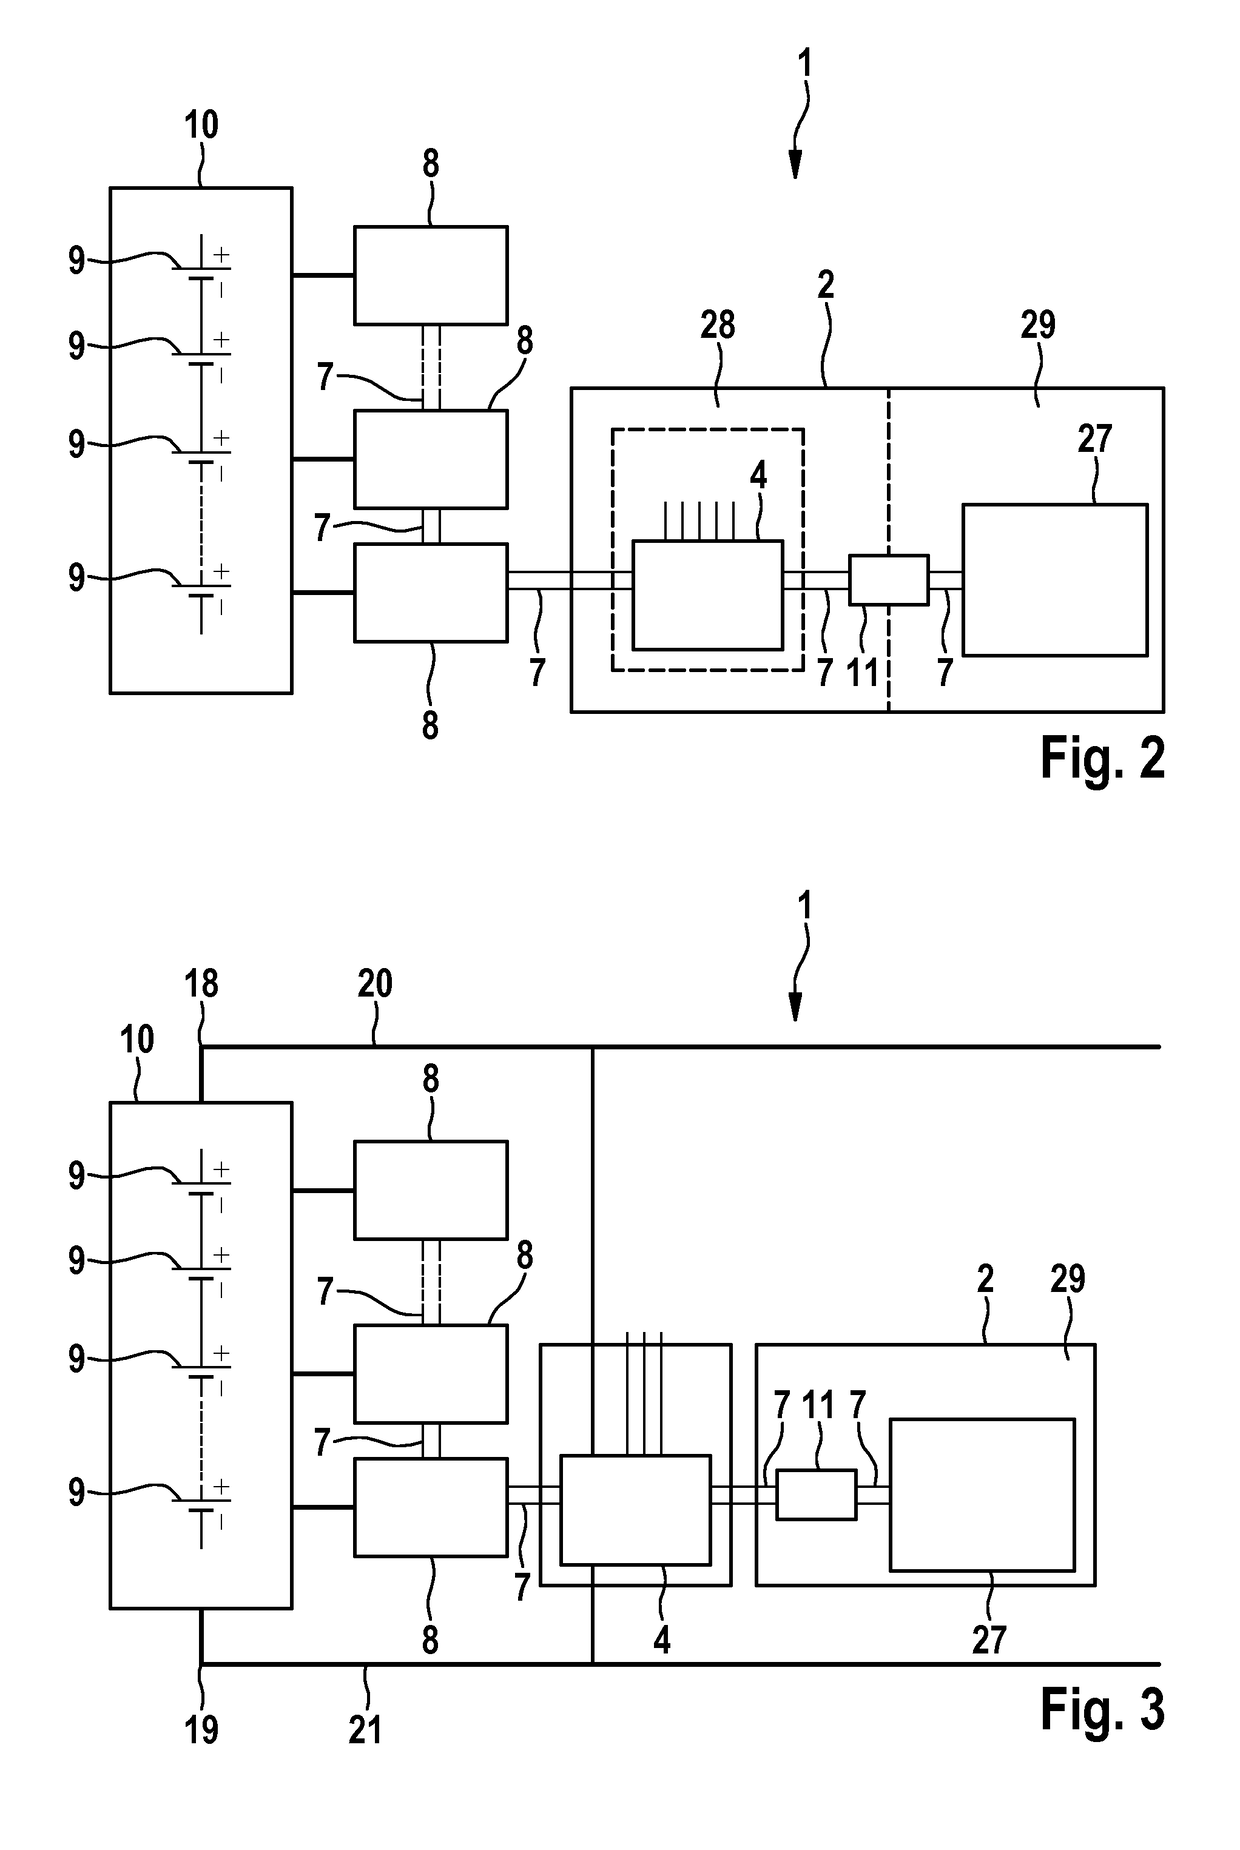 Battery management system for a battery having a plurality of battery cells, and method therefor